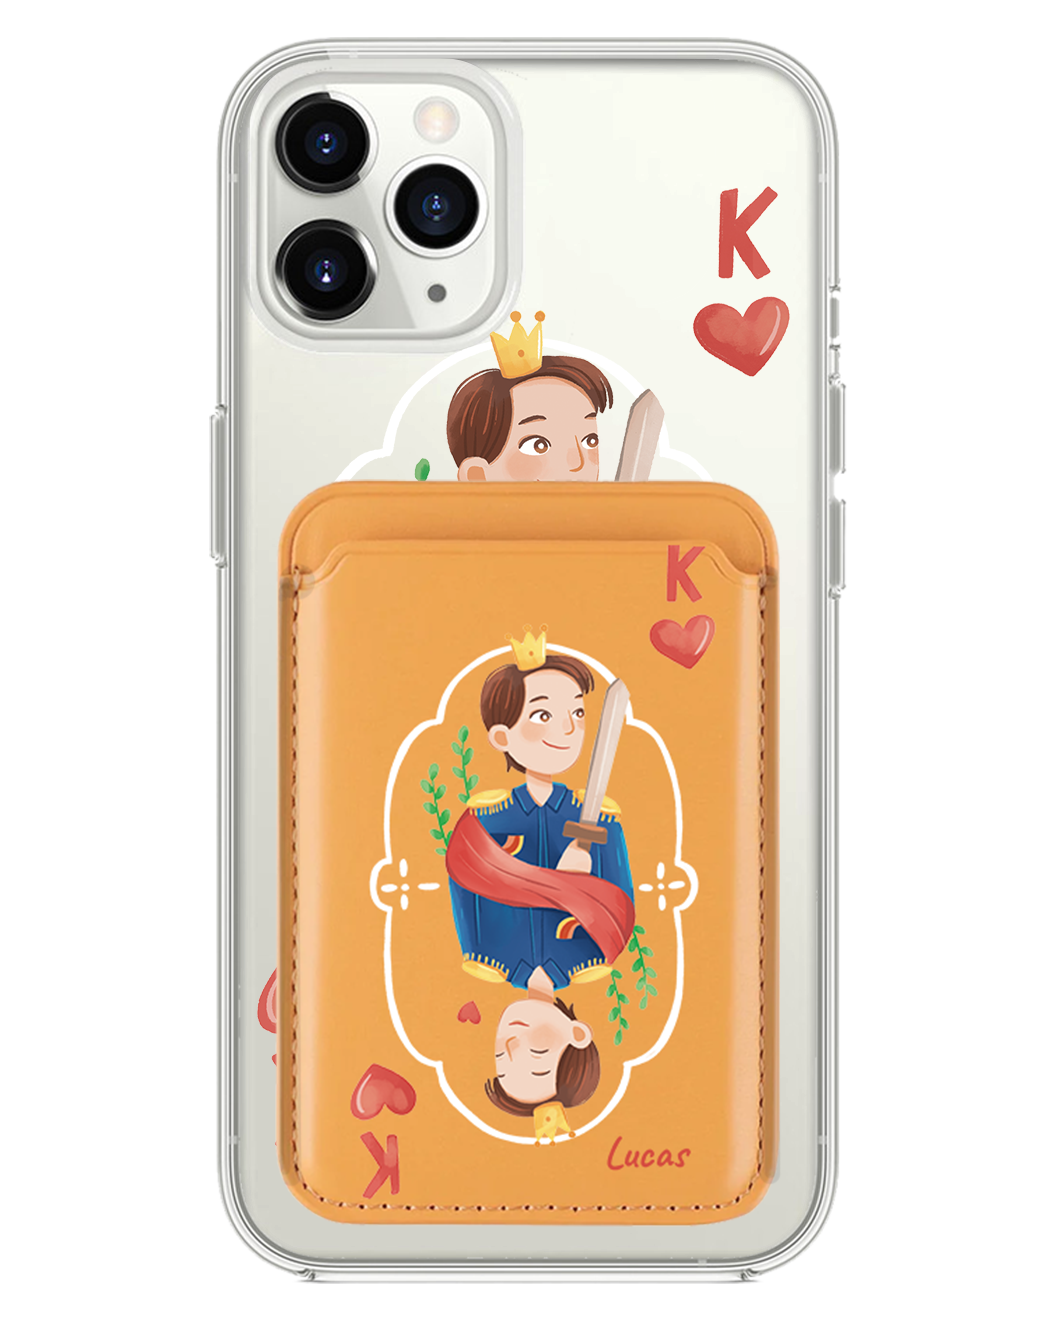 iPhone Magnetic Wallet Case - King (Couple Case)